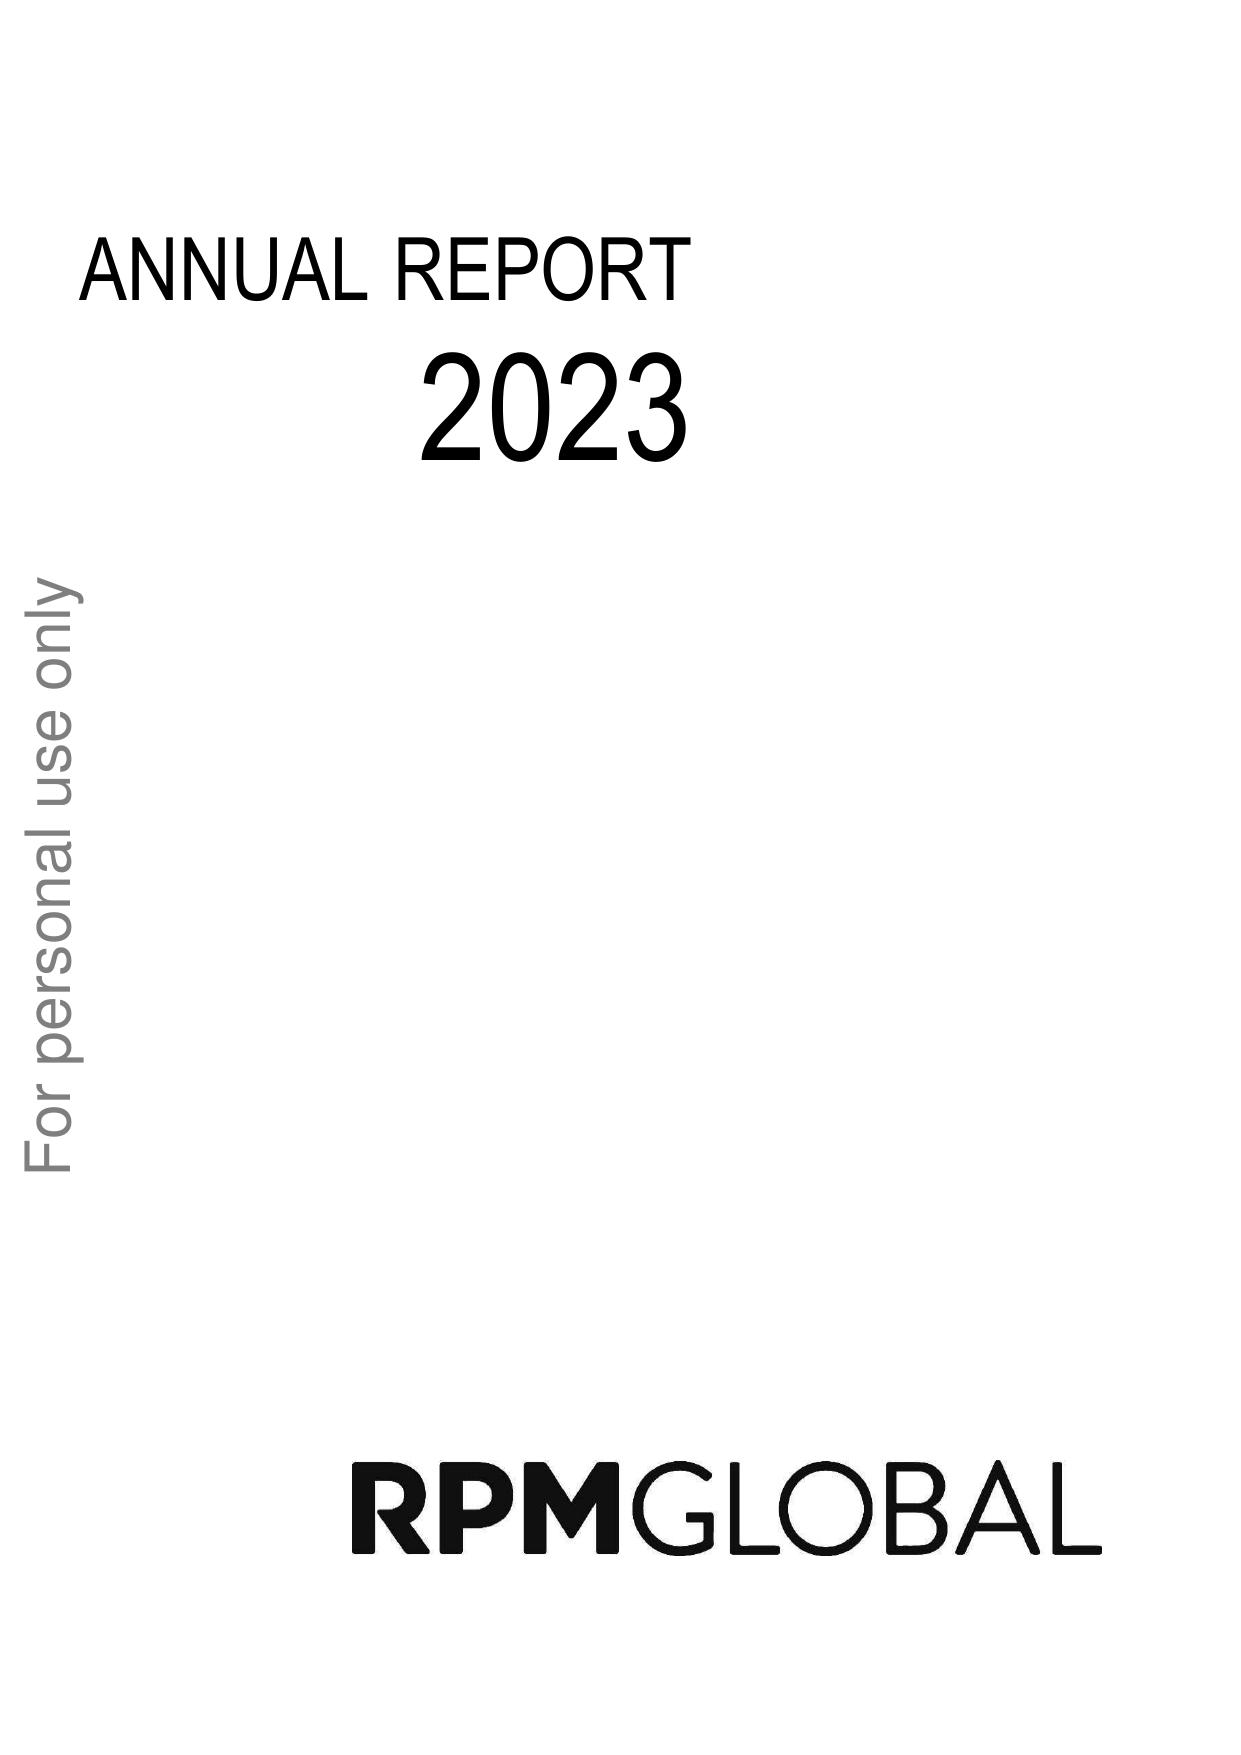 RPMGLOBAL 2023 Annual Report